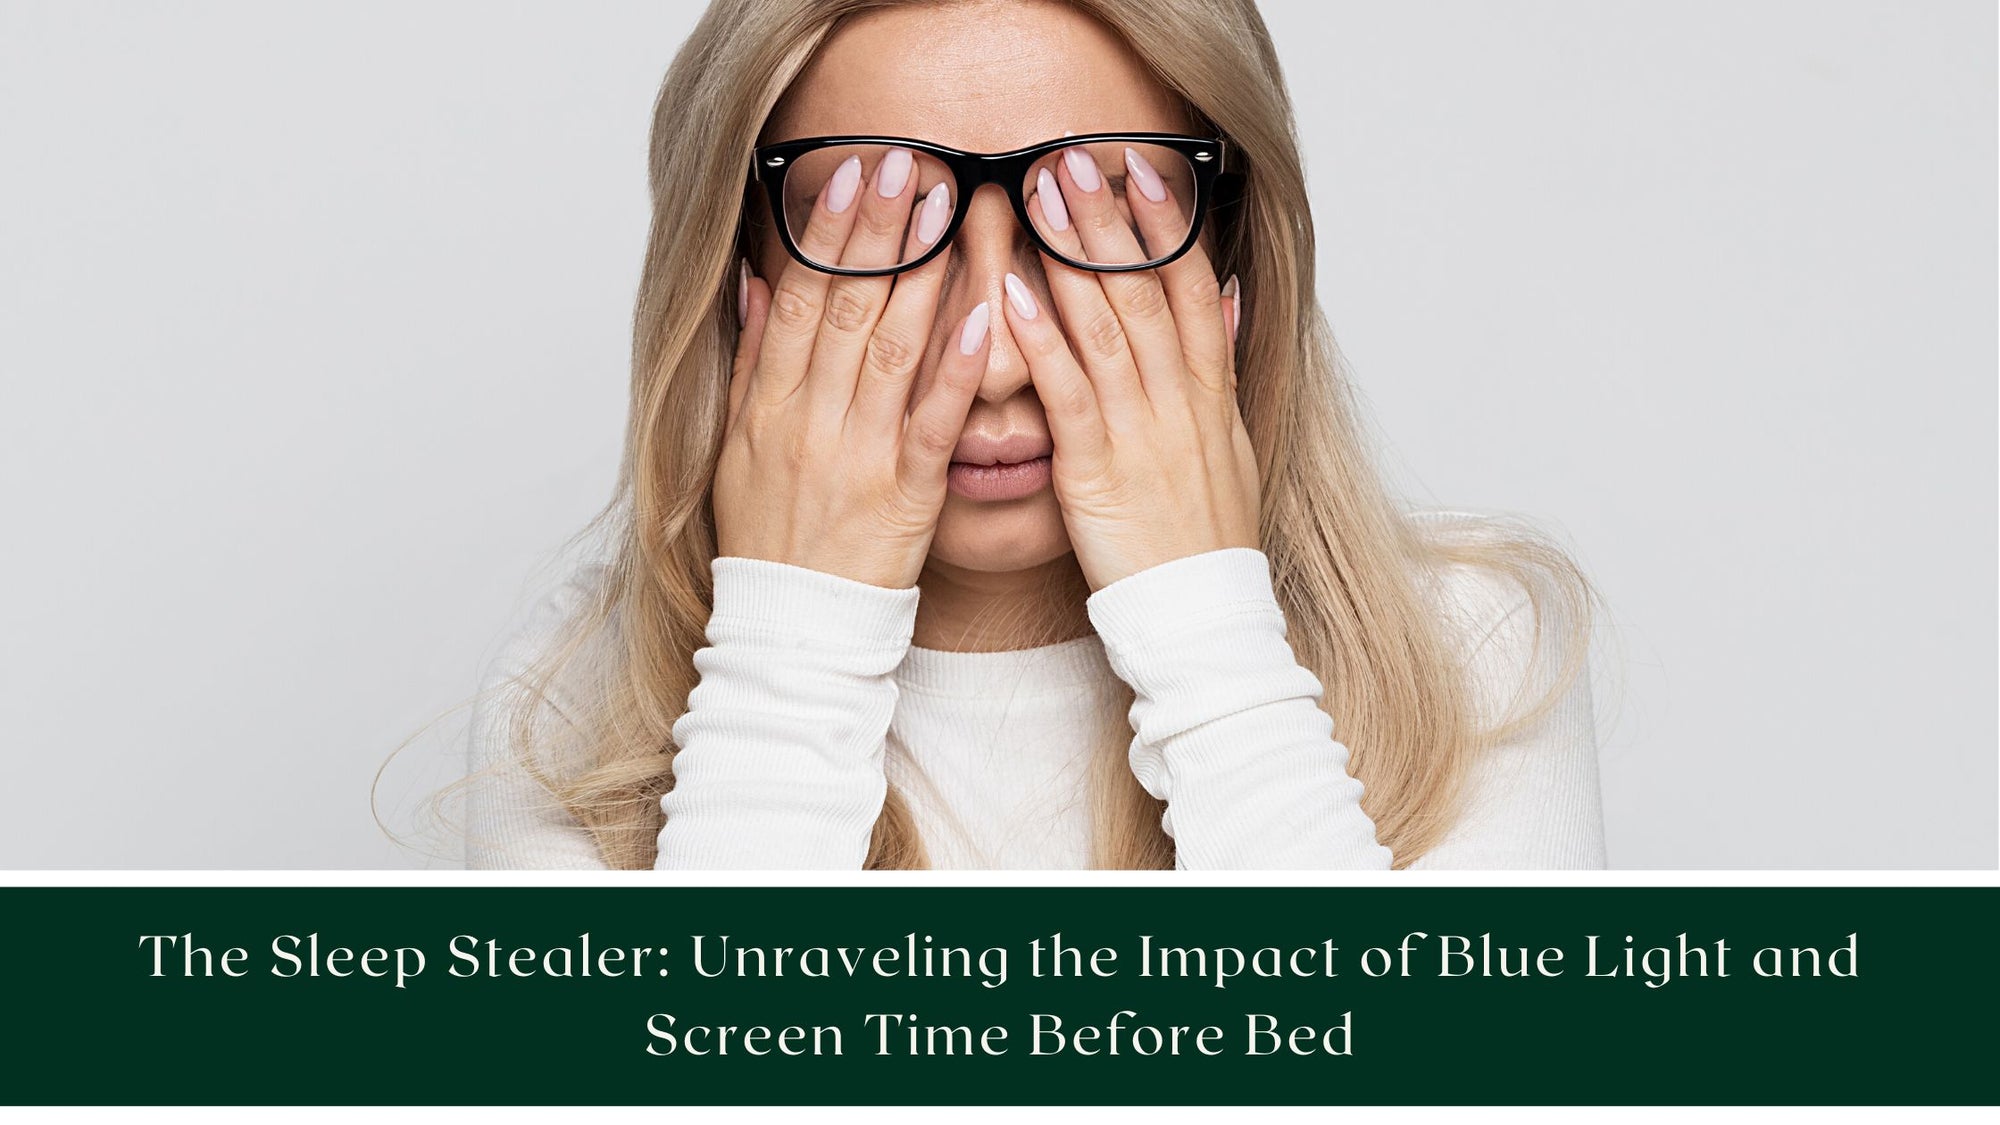 The Sleep Stealer: Unraveling the Impact of Blue Light and Screen Time Before Bed